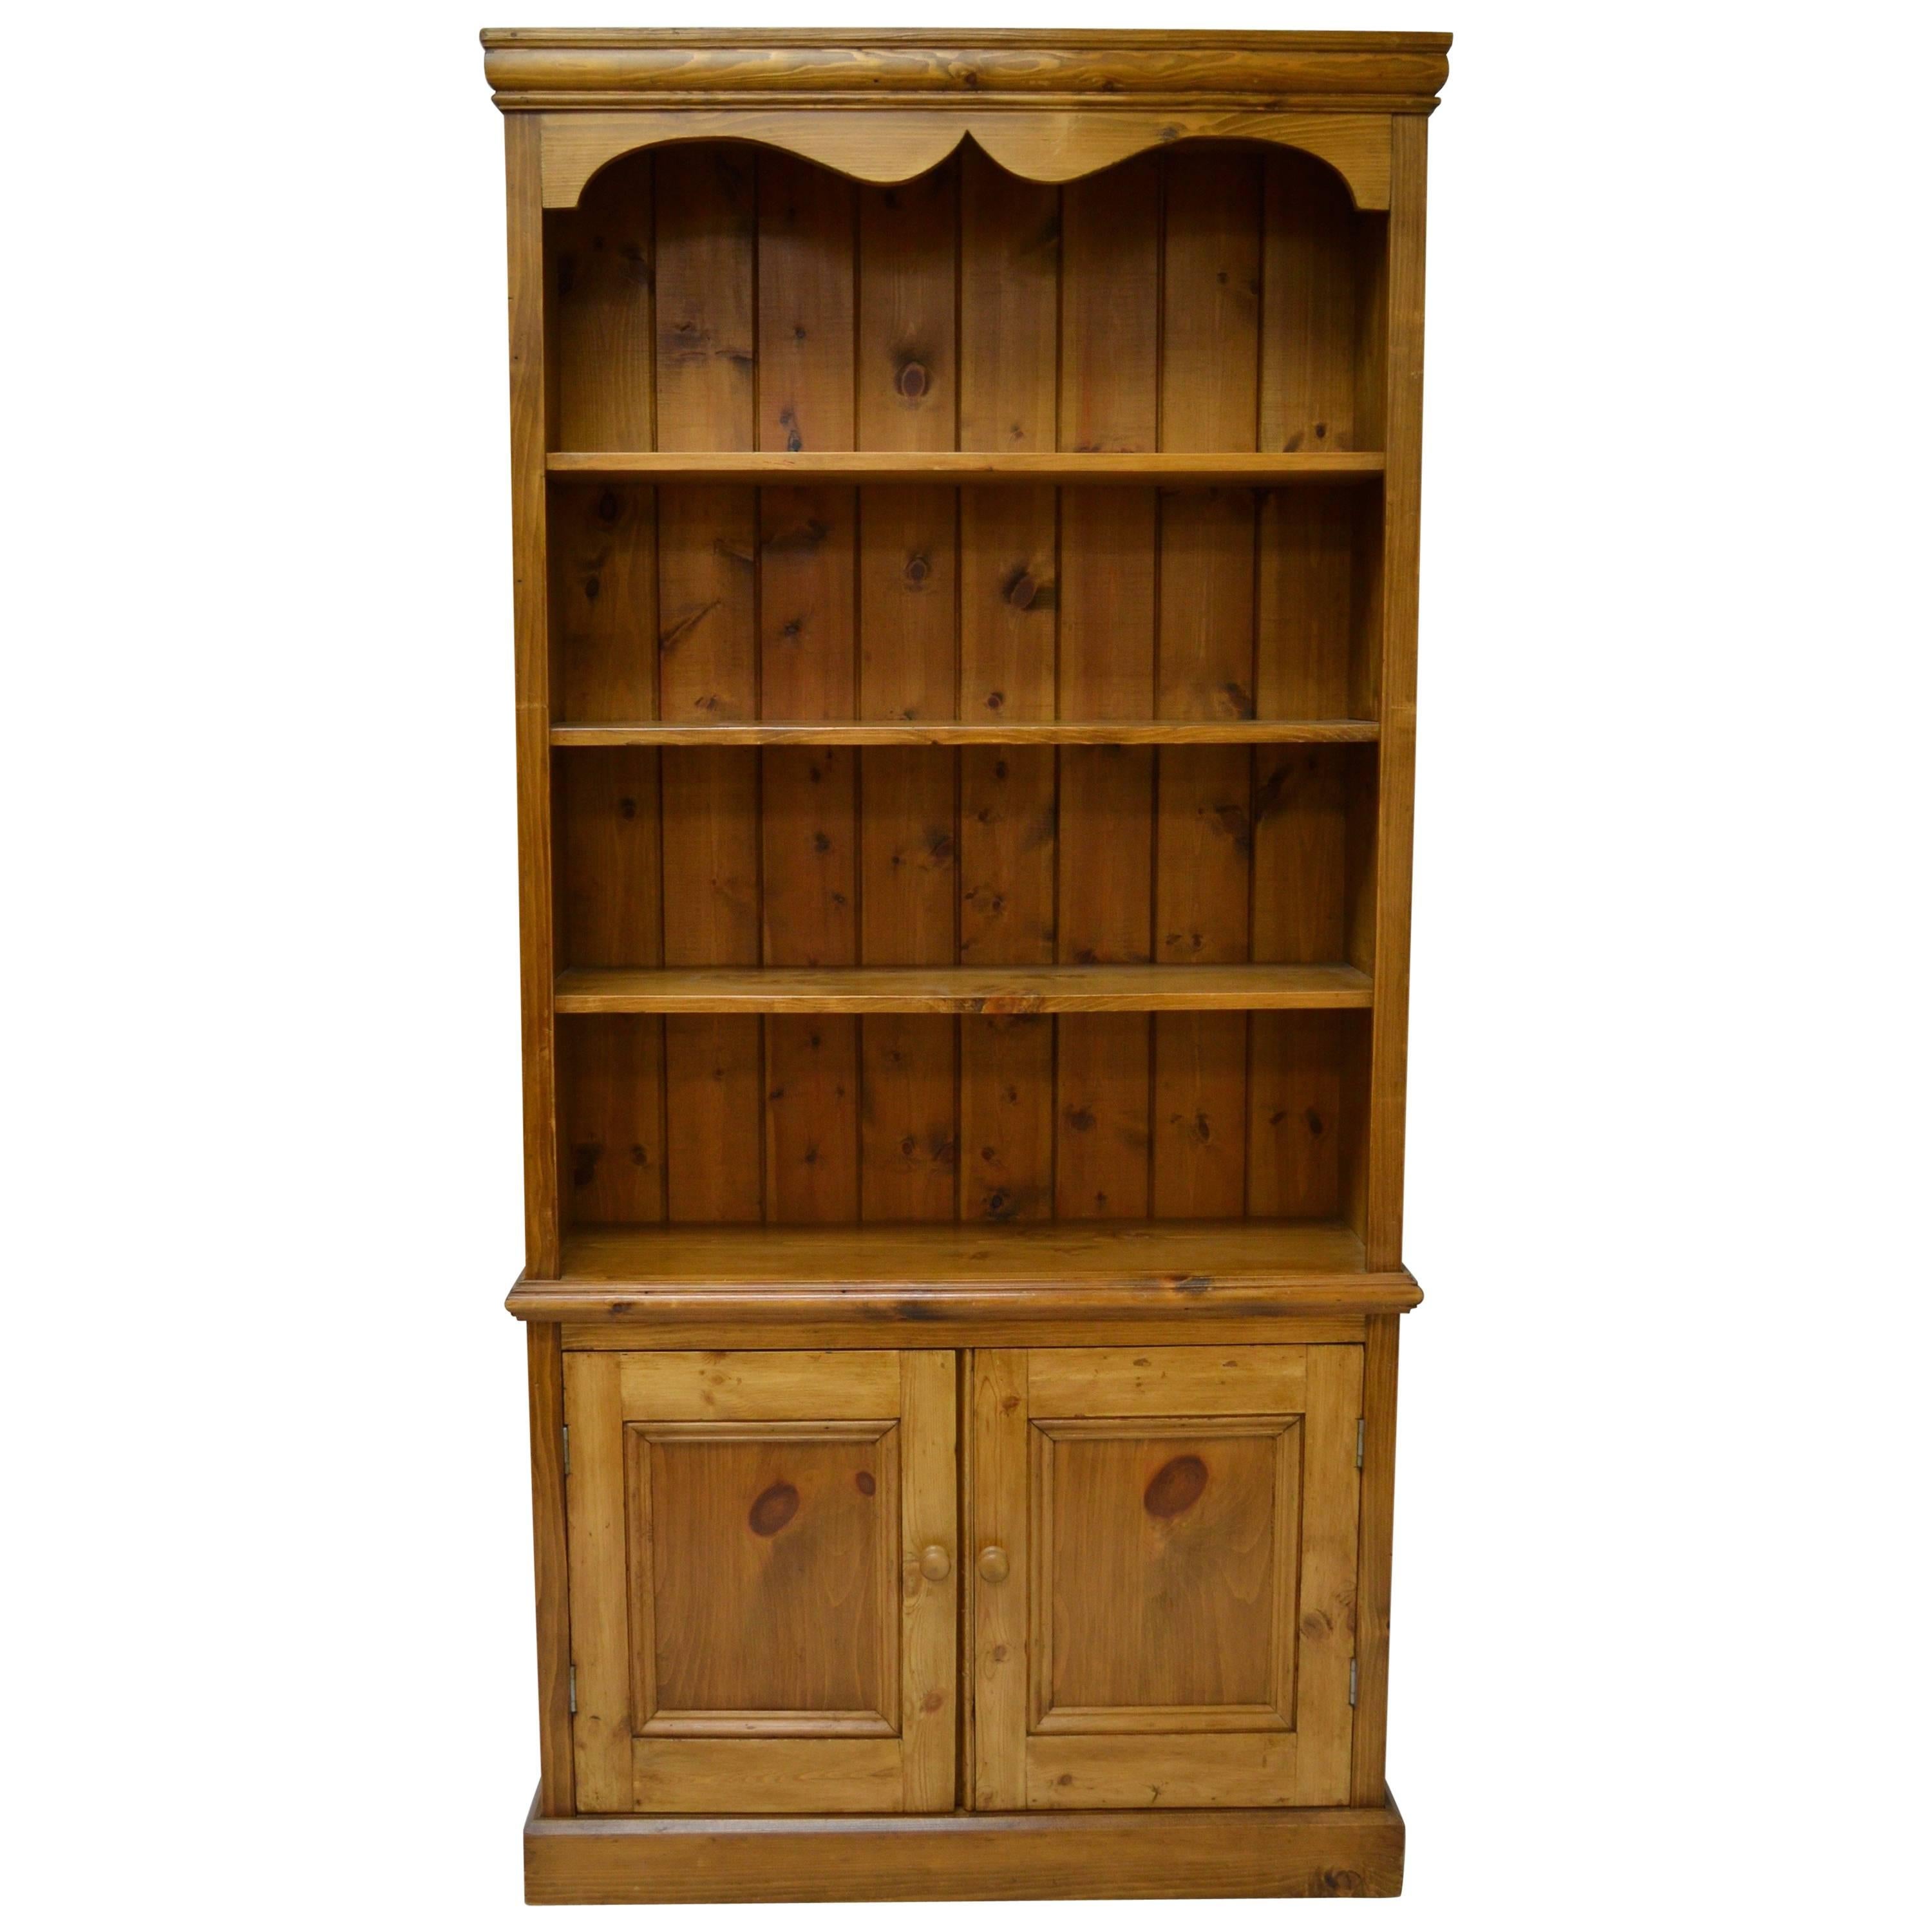 Vintage Pine Bookcase with Two Doors